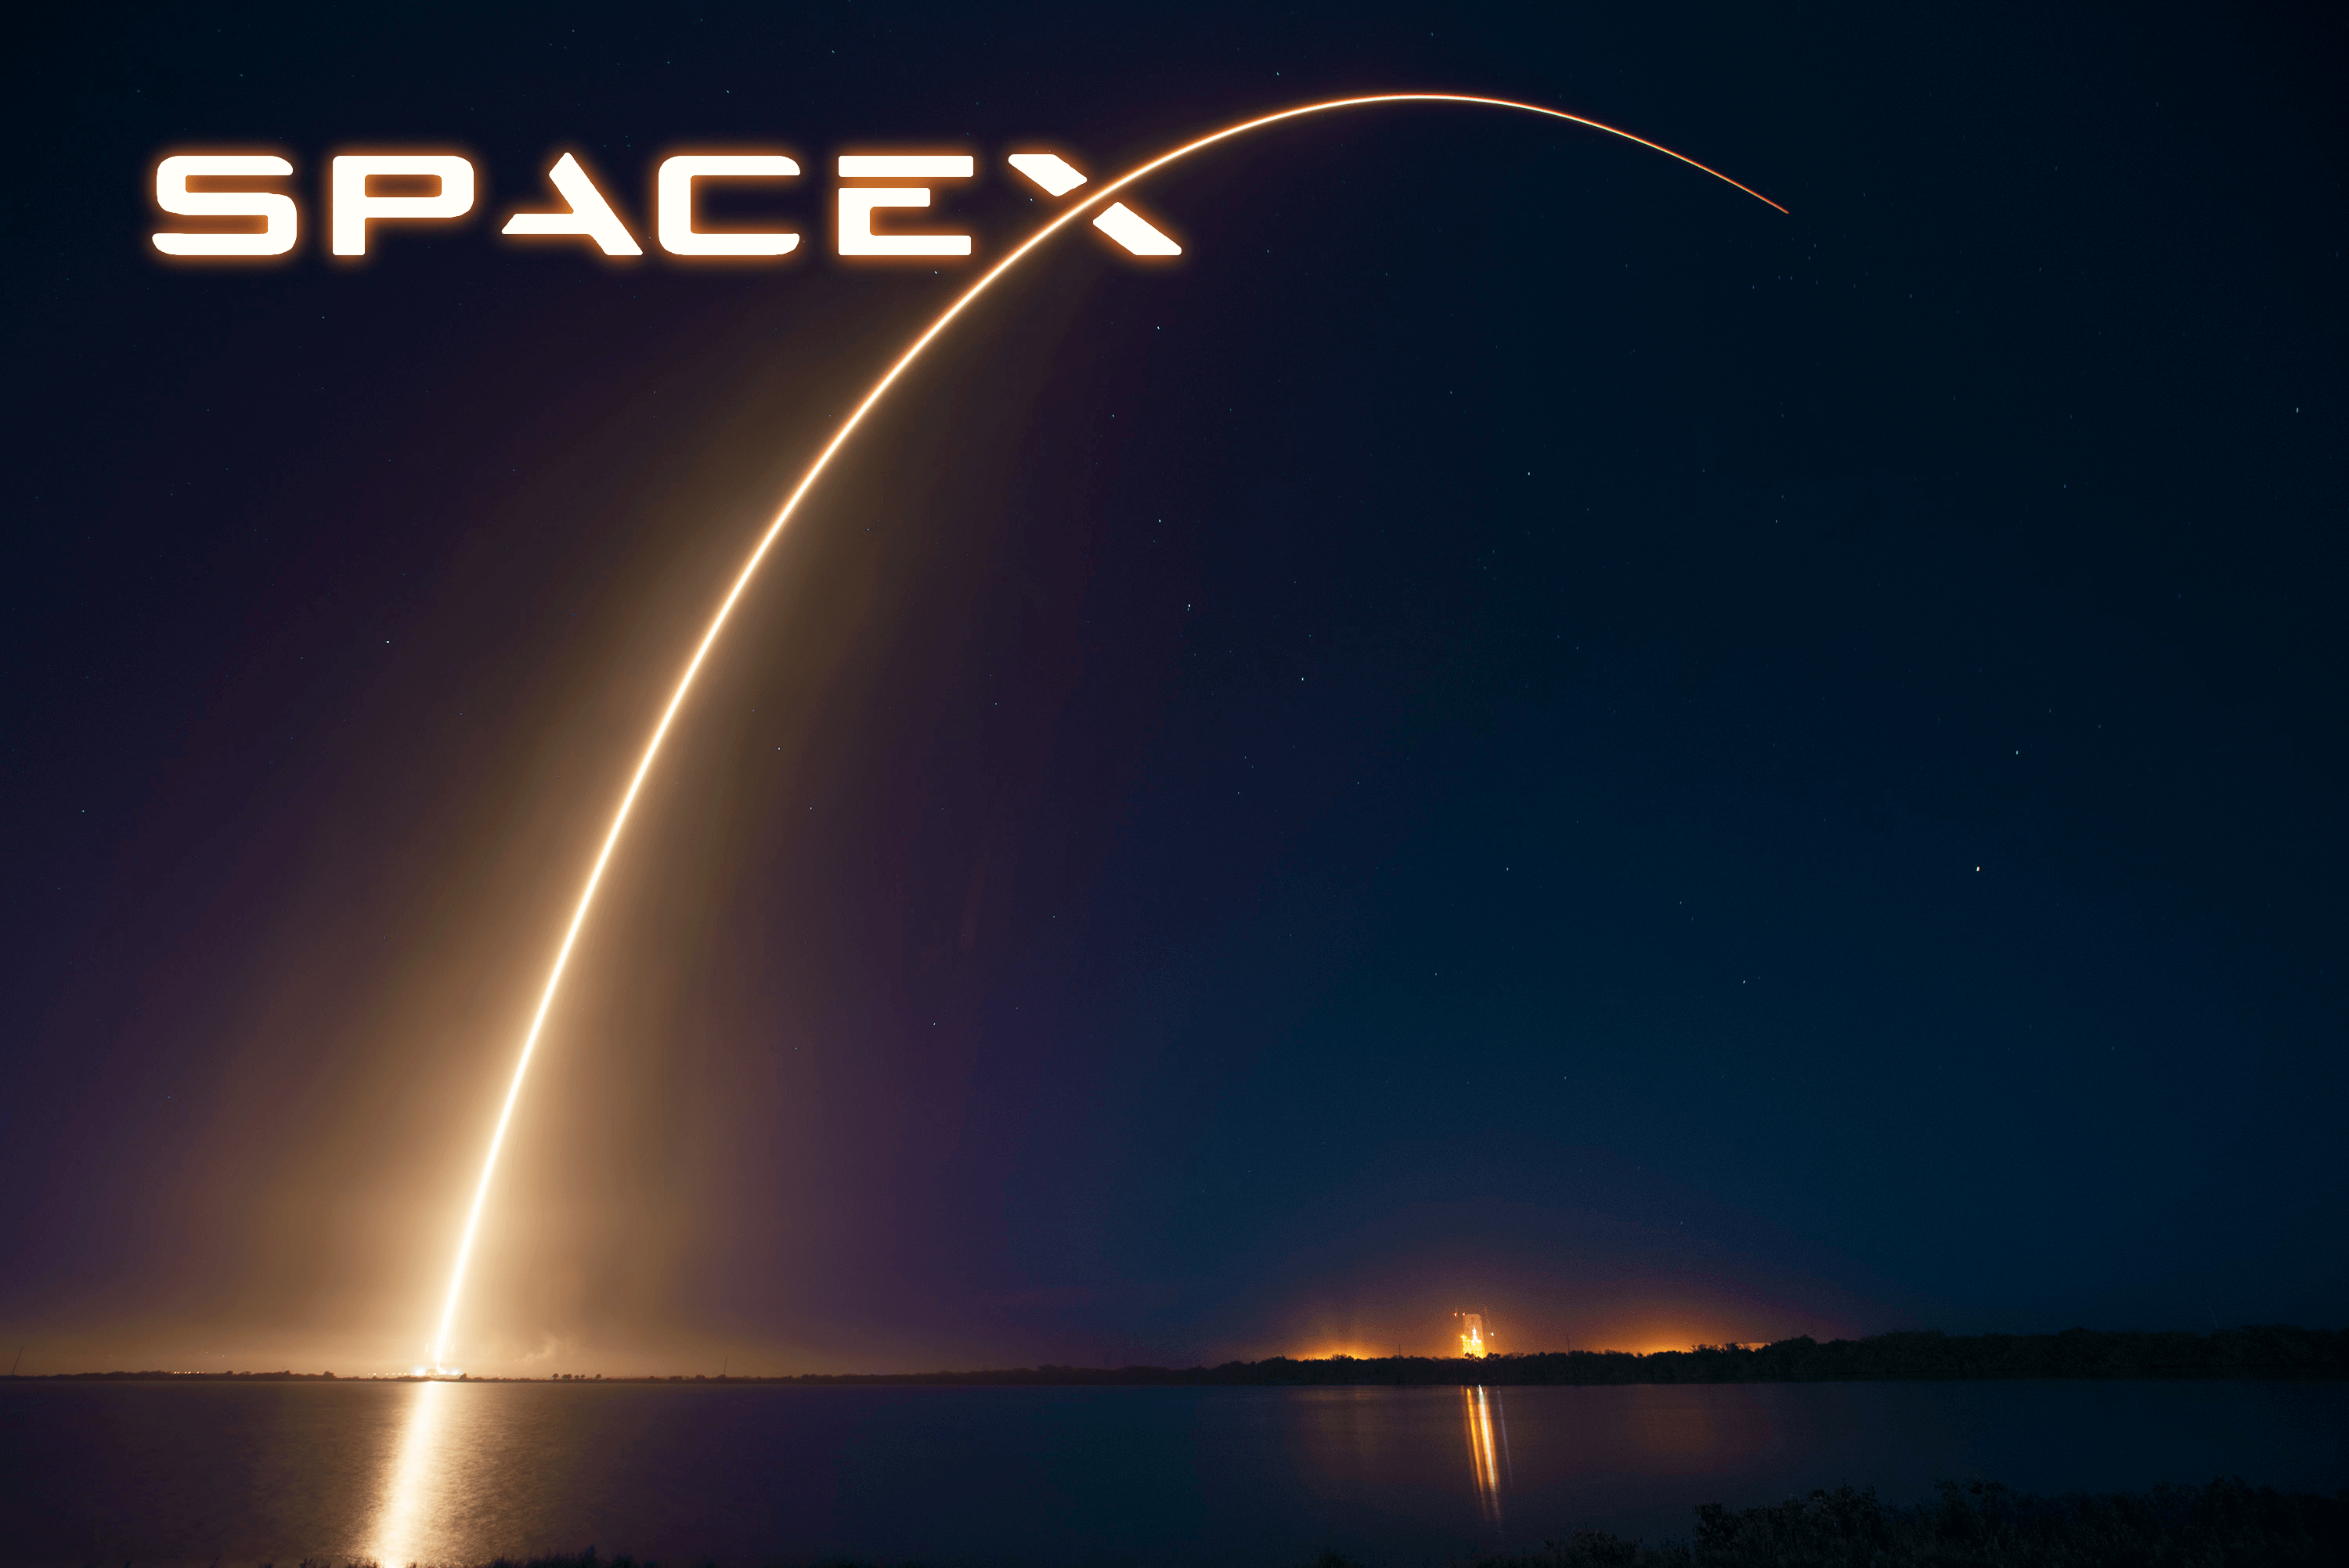 Spacex Background Wallpaper 4k Hacker - IMAGESEE